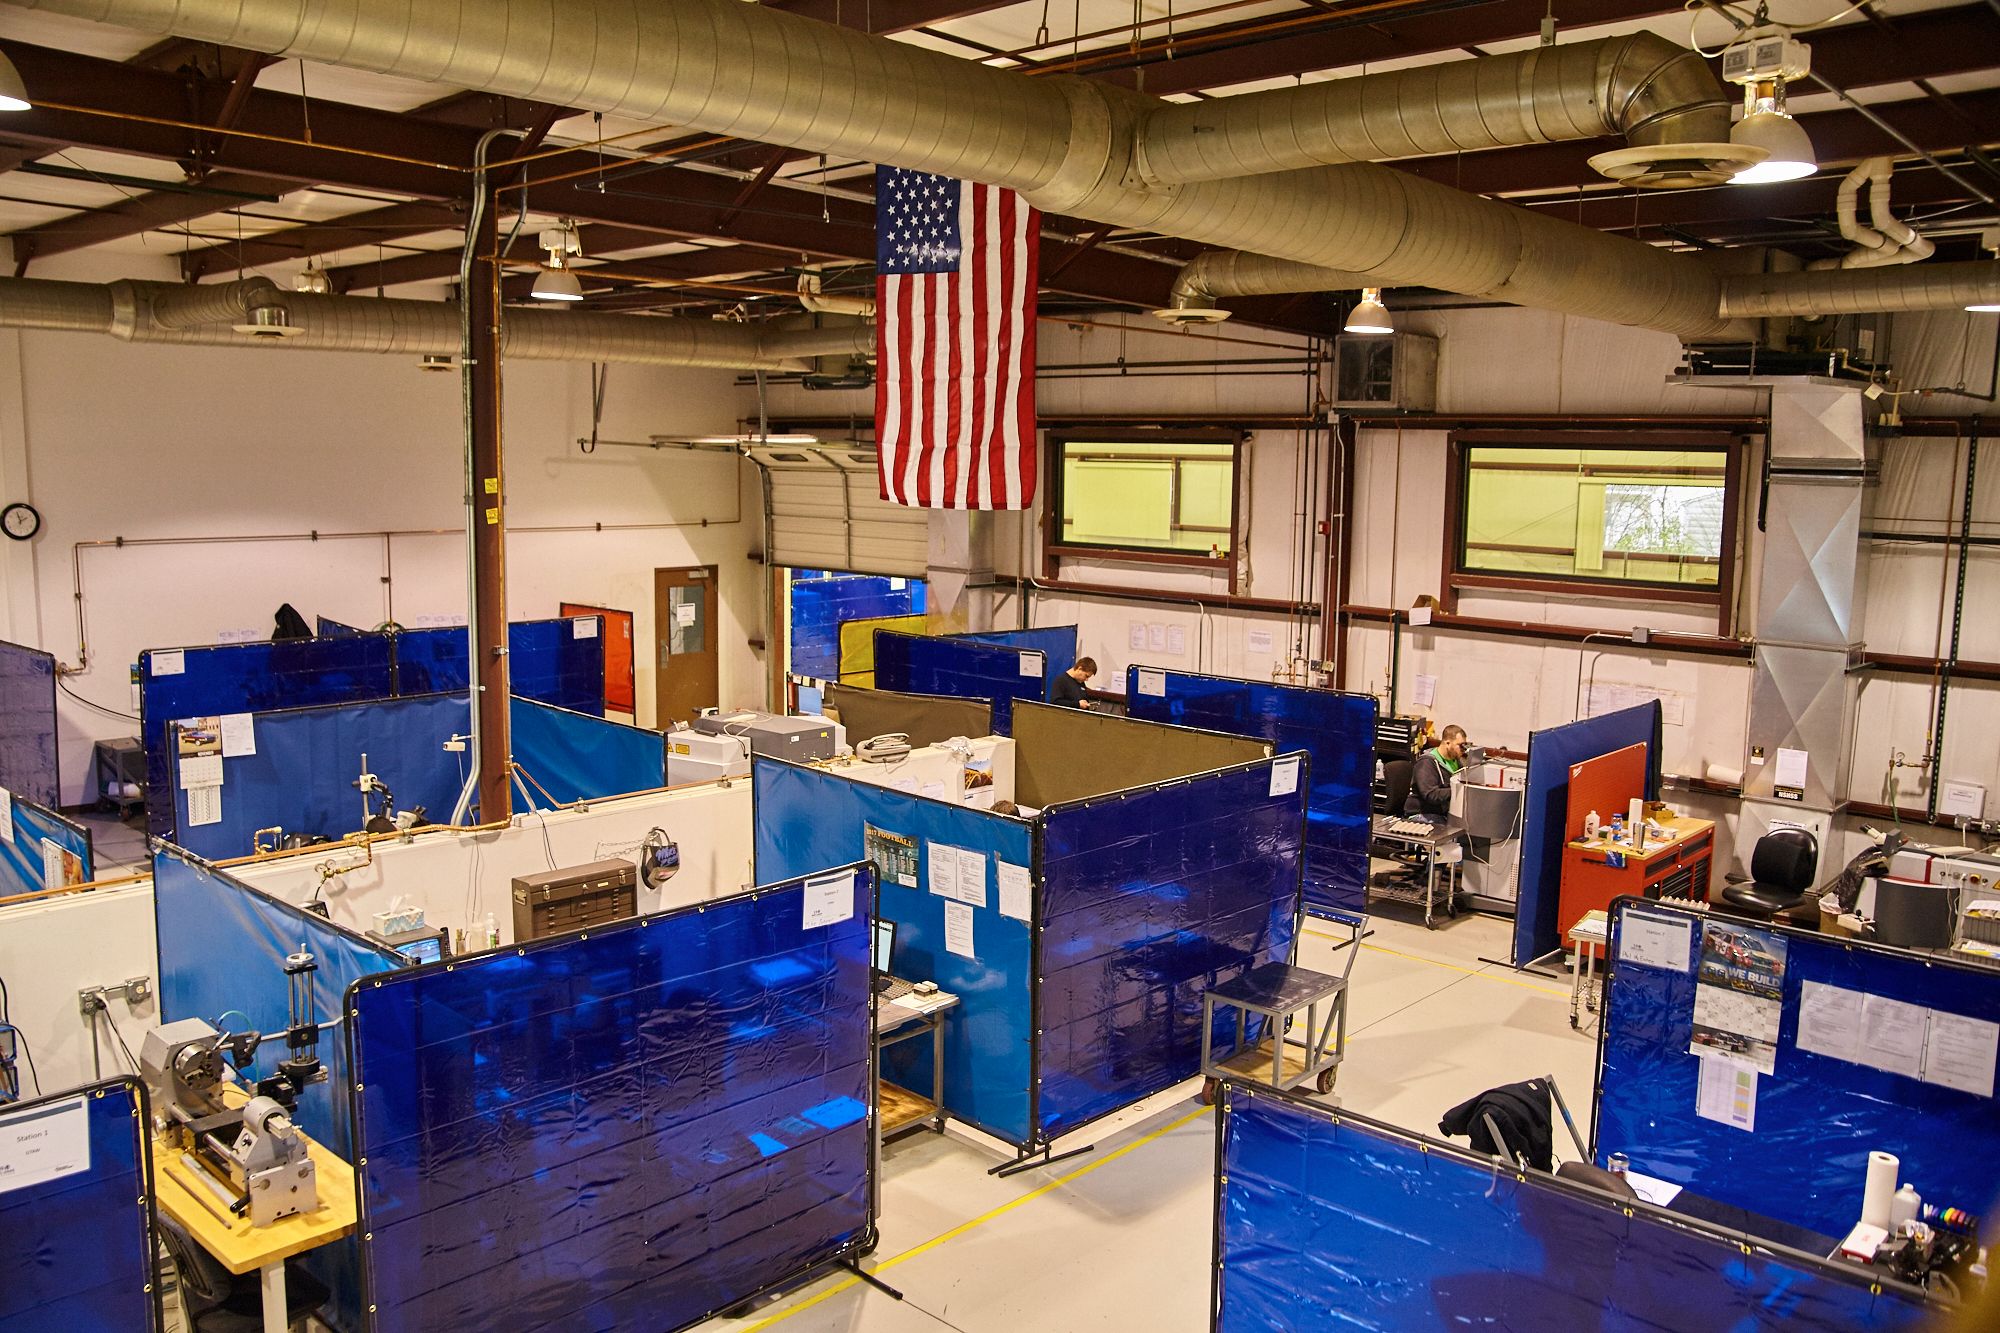 Inside the Fort Wayne facility, clean and lab-quality welding setup